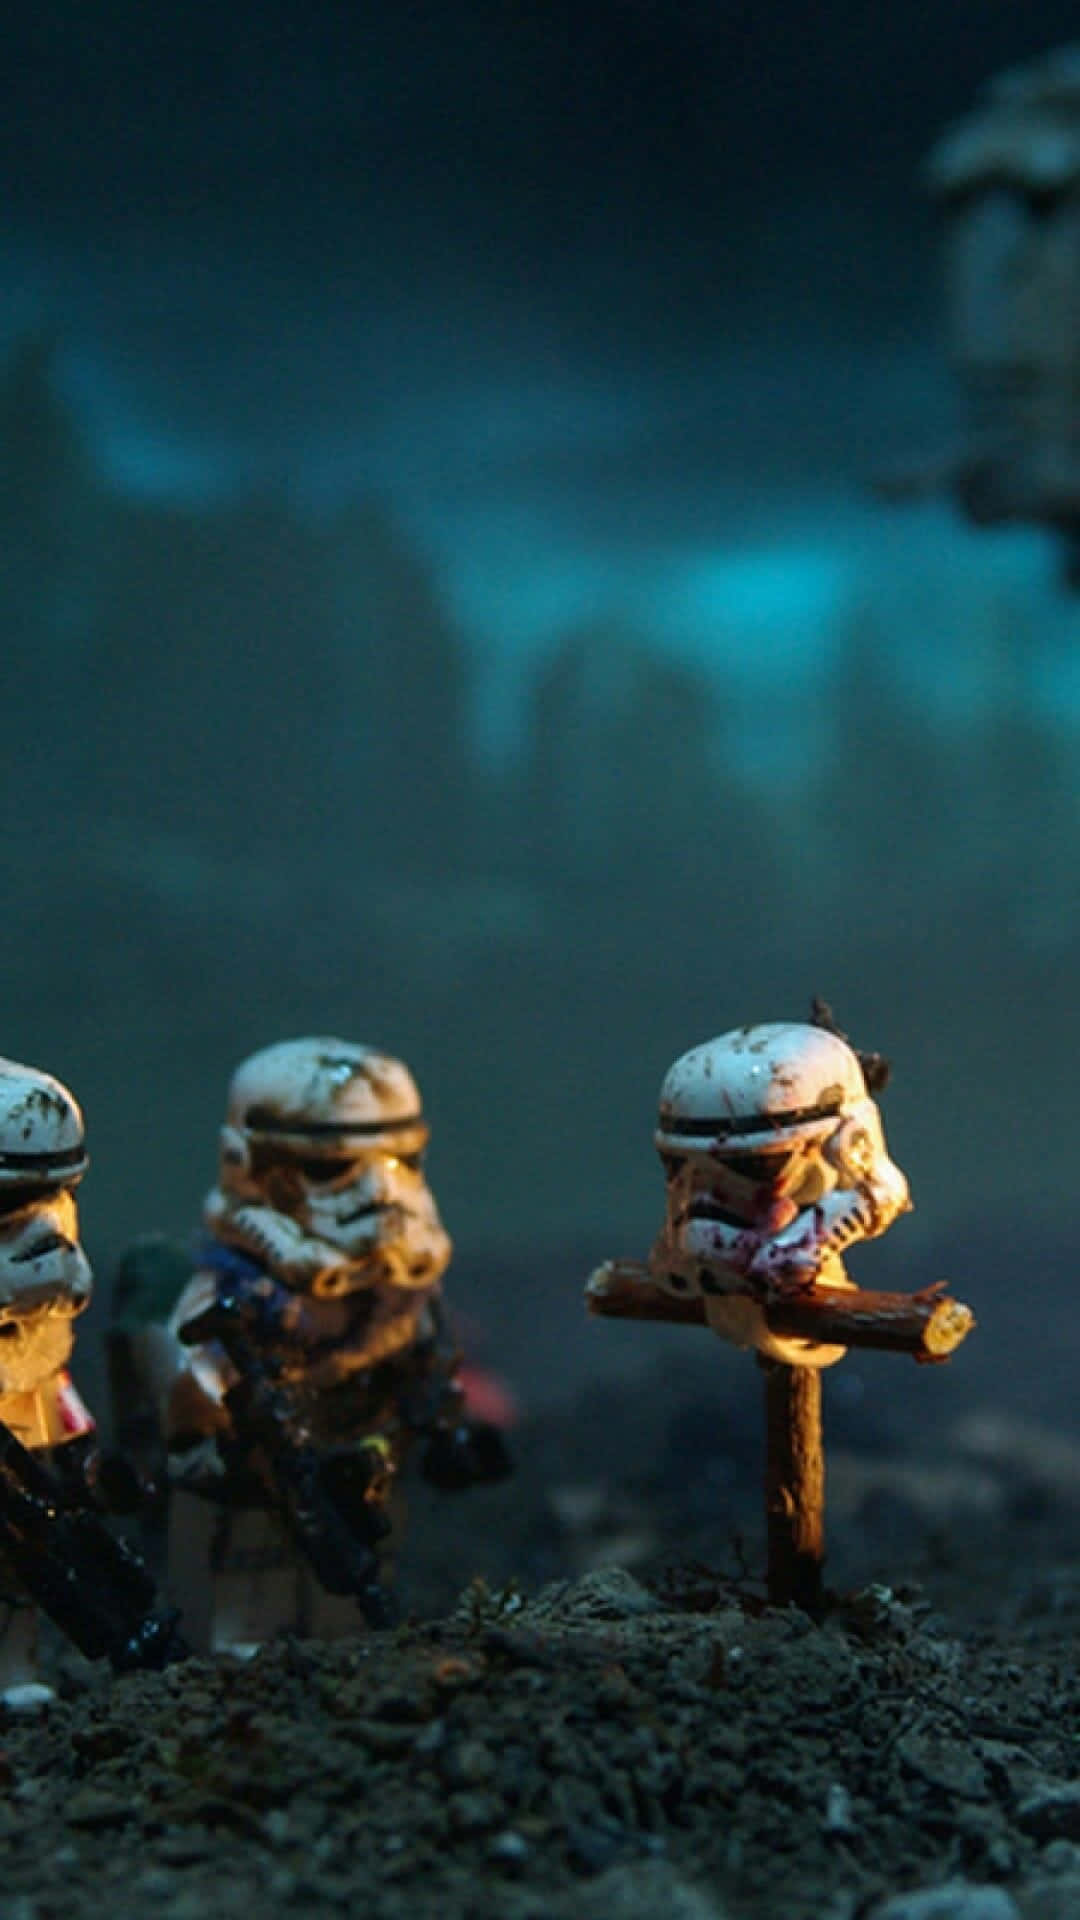 Lego Star Wars Stormtroopers Standing On A Dirt Road Wallpaper